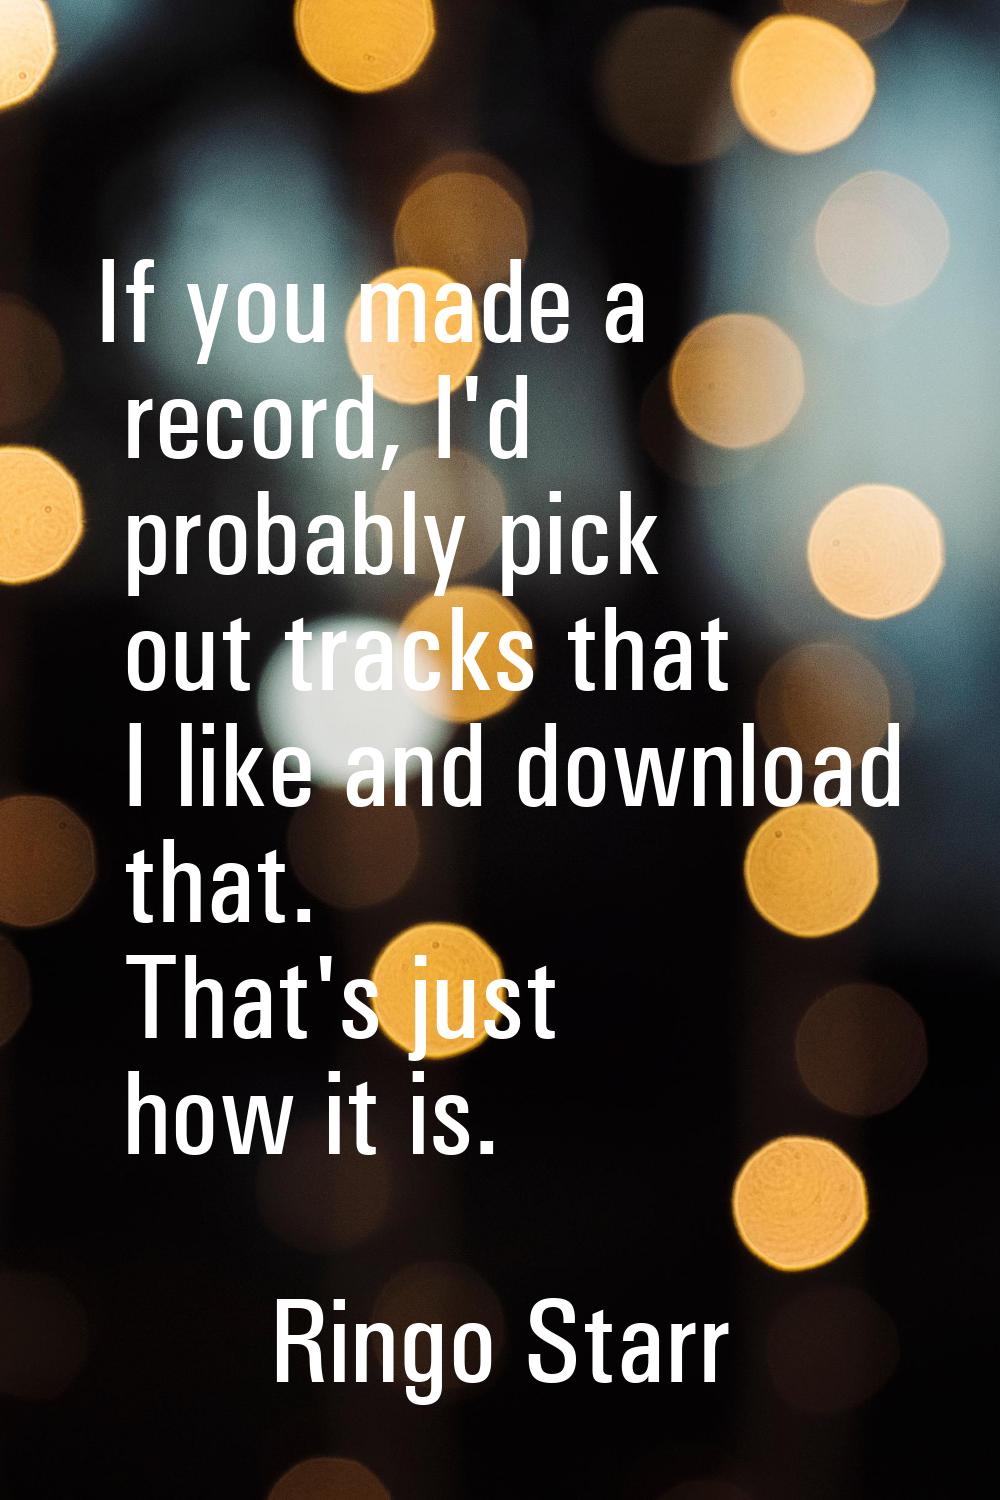 If you made a record, I'd probably pick out tracks that I like and download that. That's just how i